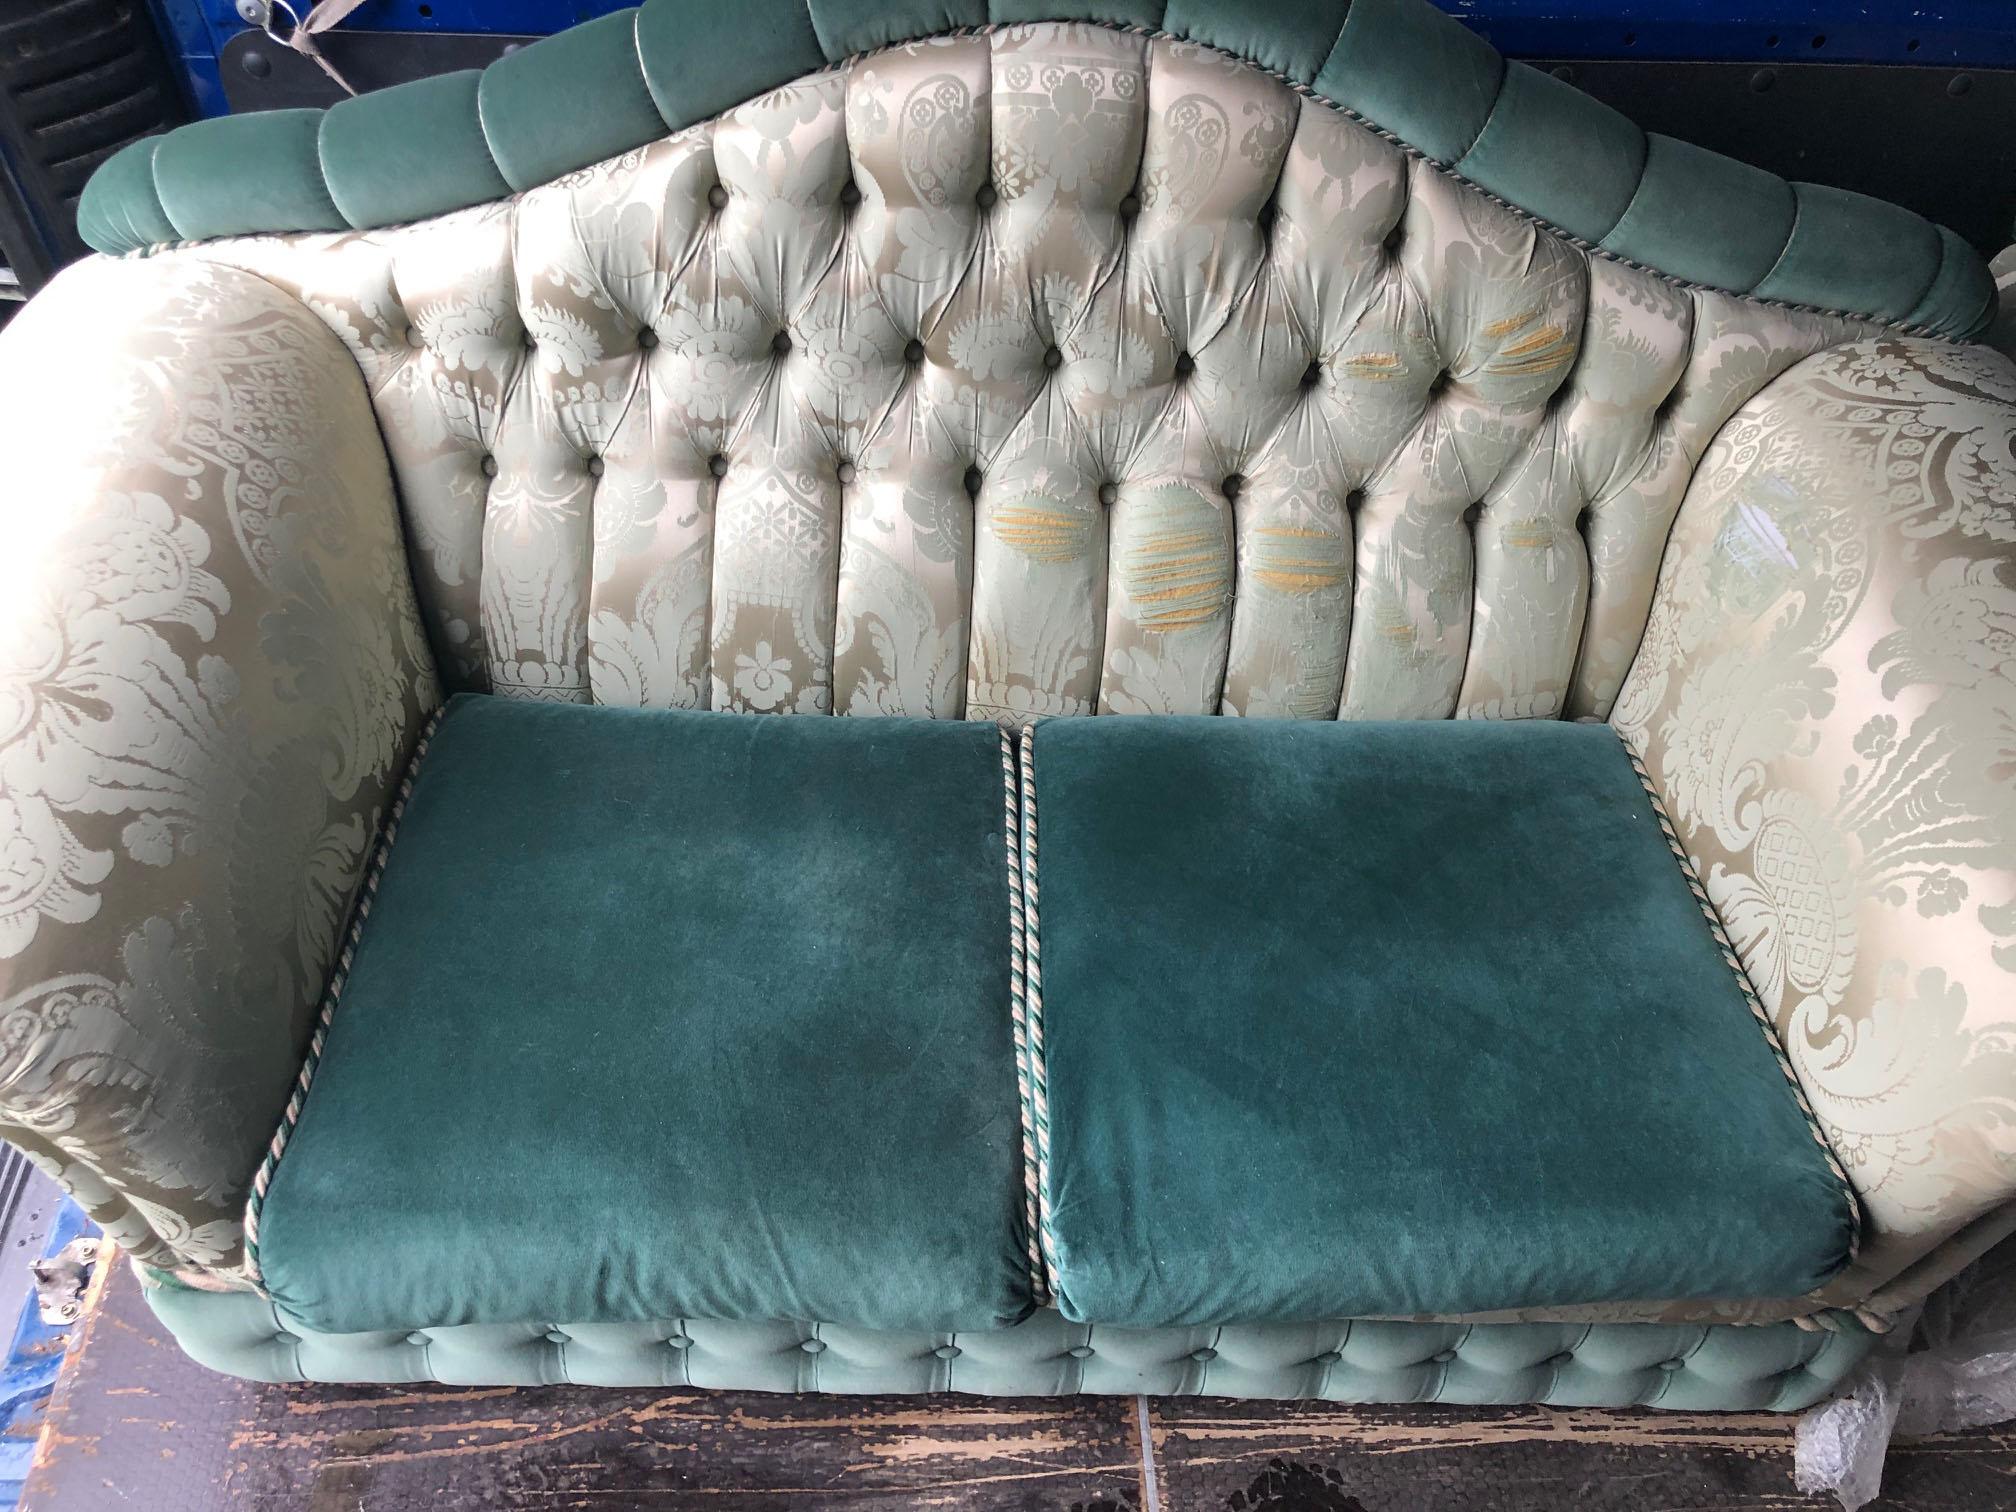 Original armchair and sofa from 1980, produced by the renowned Zanaboni company of Milan Italy, leader in luxury.
The upholstery is in silk, of a very refined color.
The armchair has only a small tear on the low side which is covered by the green